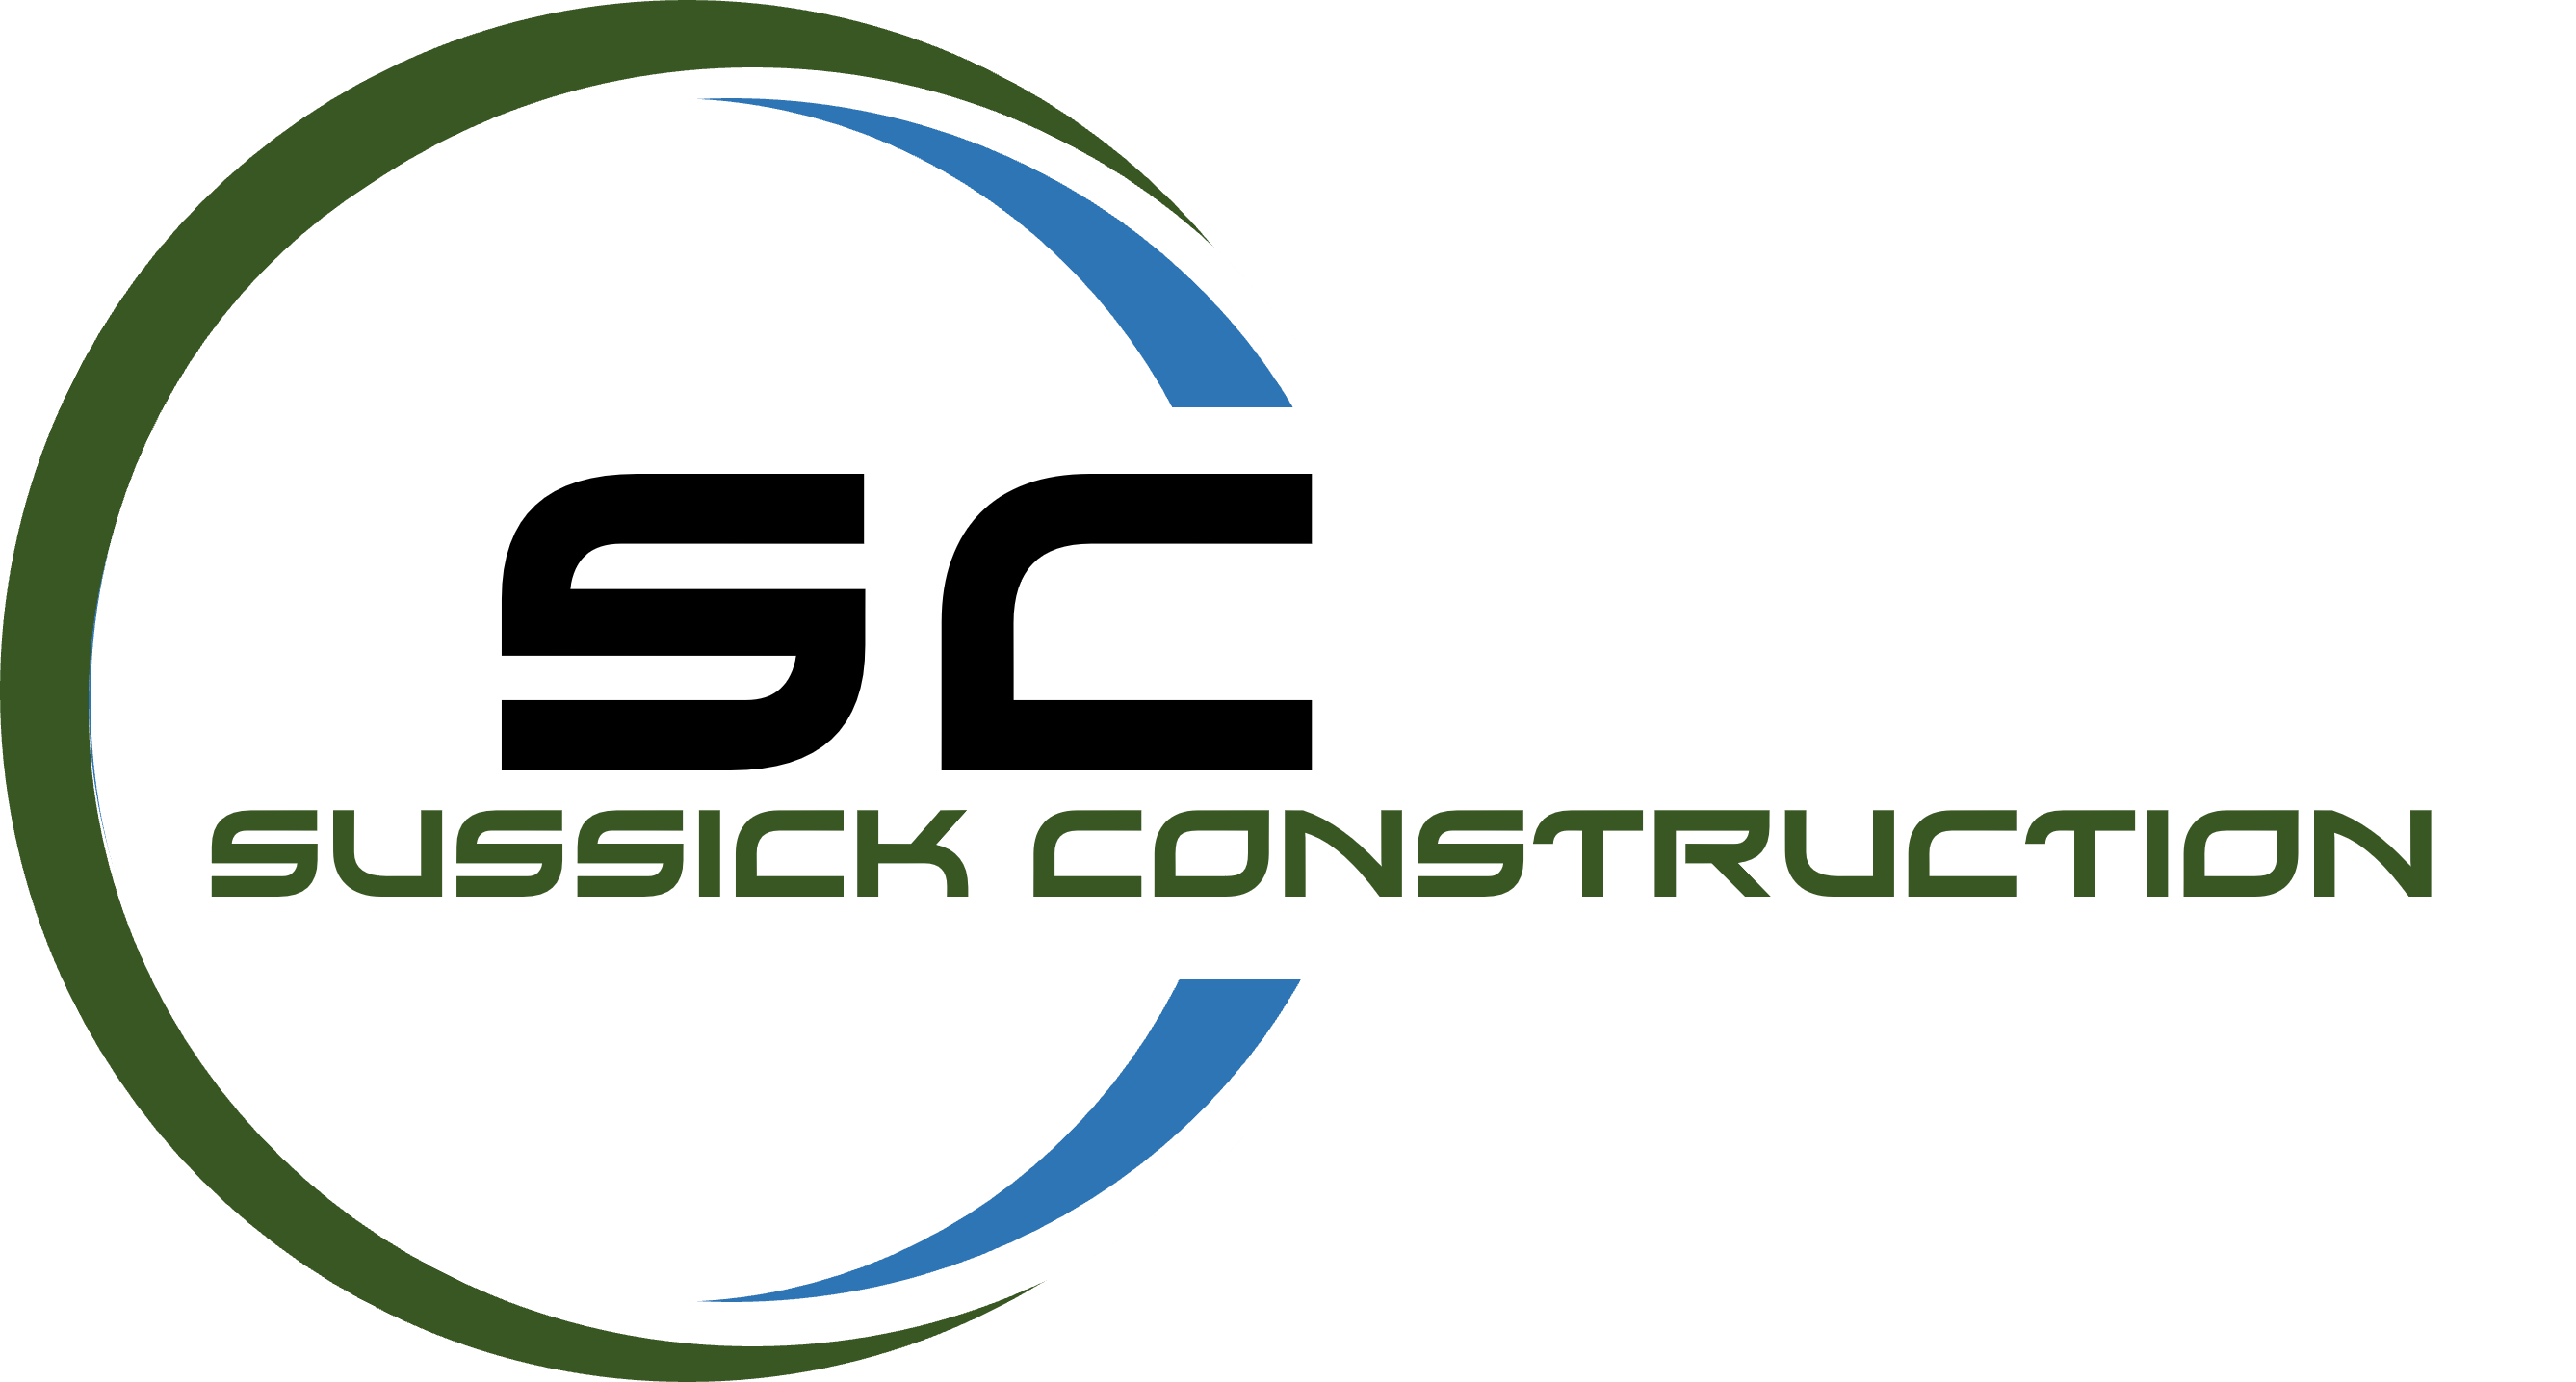 Sussick Construction Lehigh Valley Remodeling